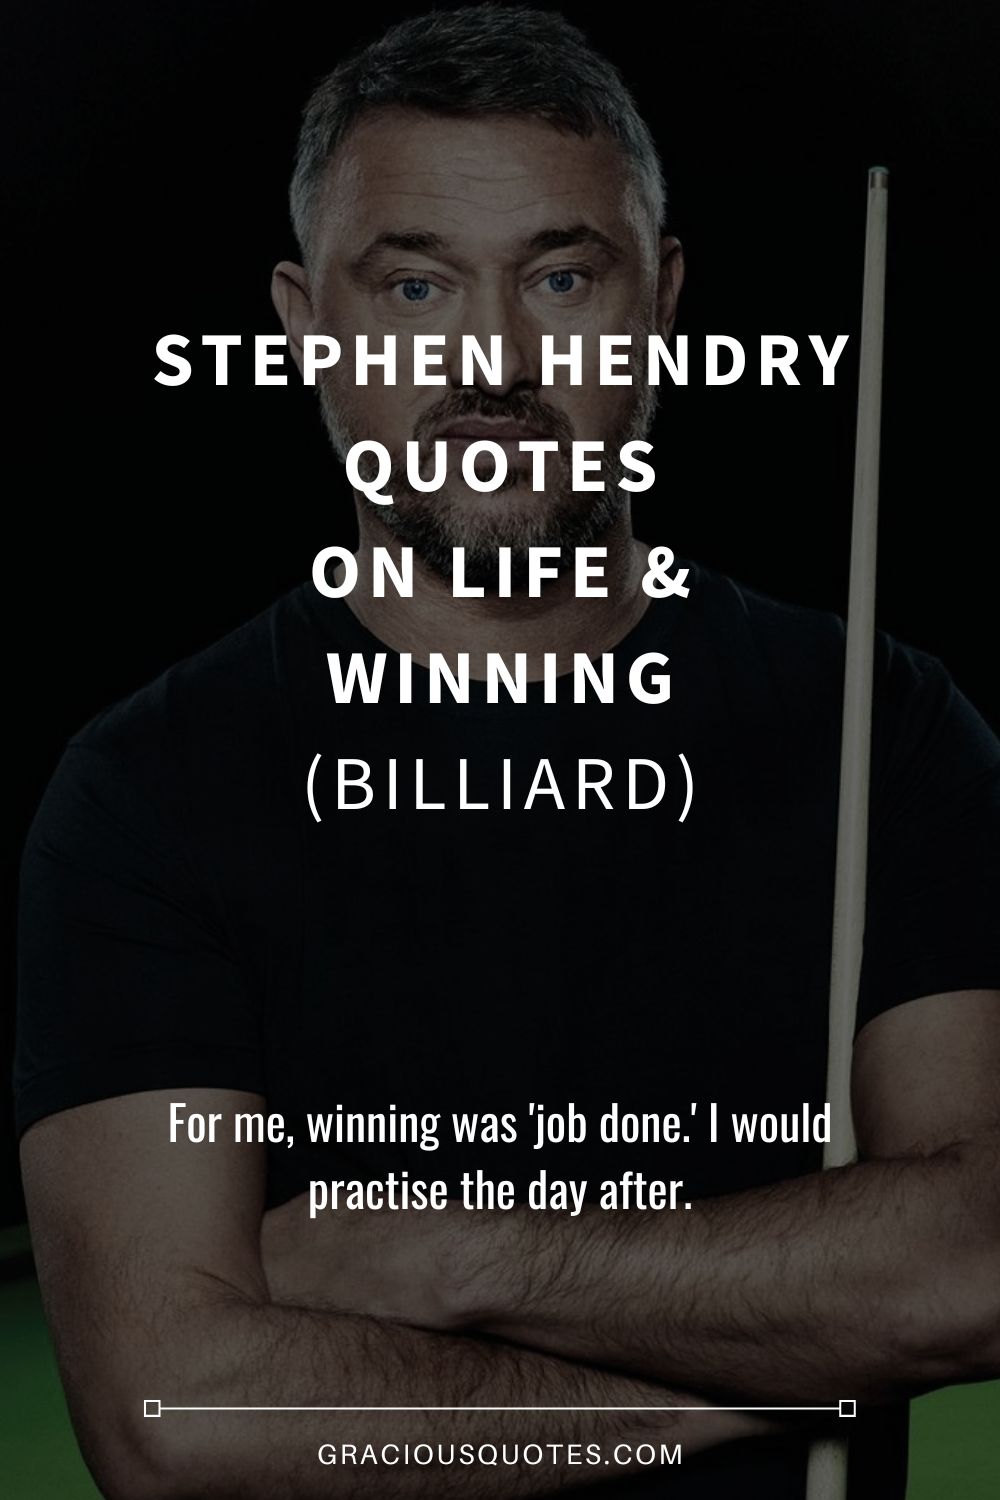 Stephen Hendry Quotes on Life & Winning (BILLIARD) - Gracious Quotes